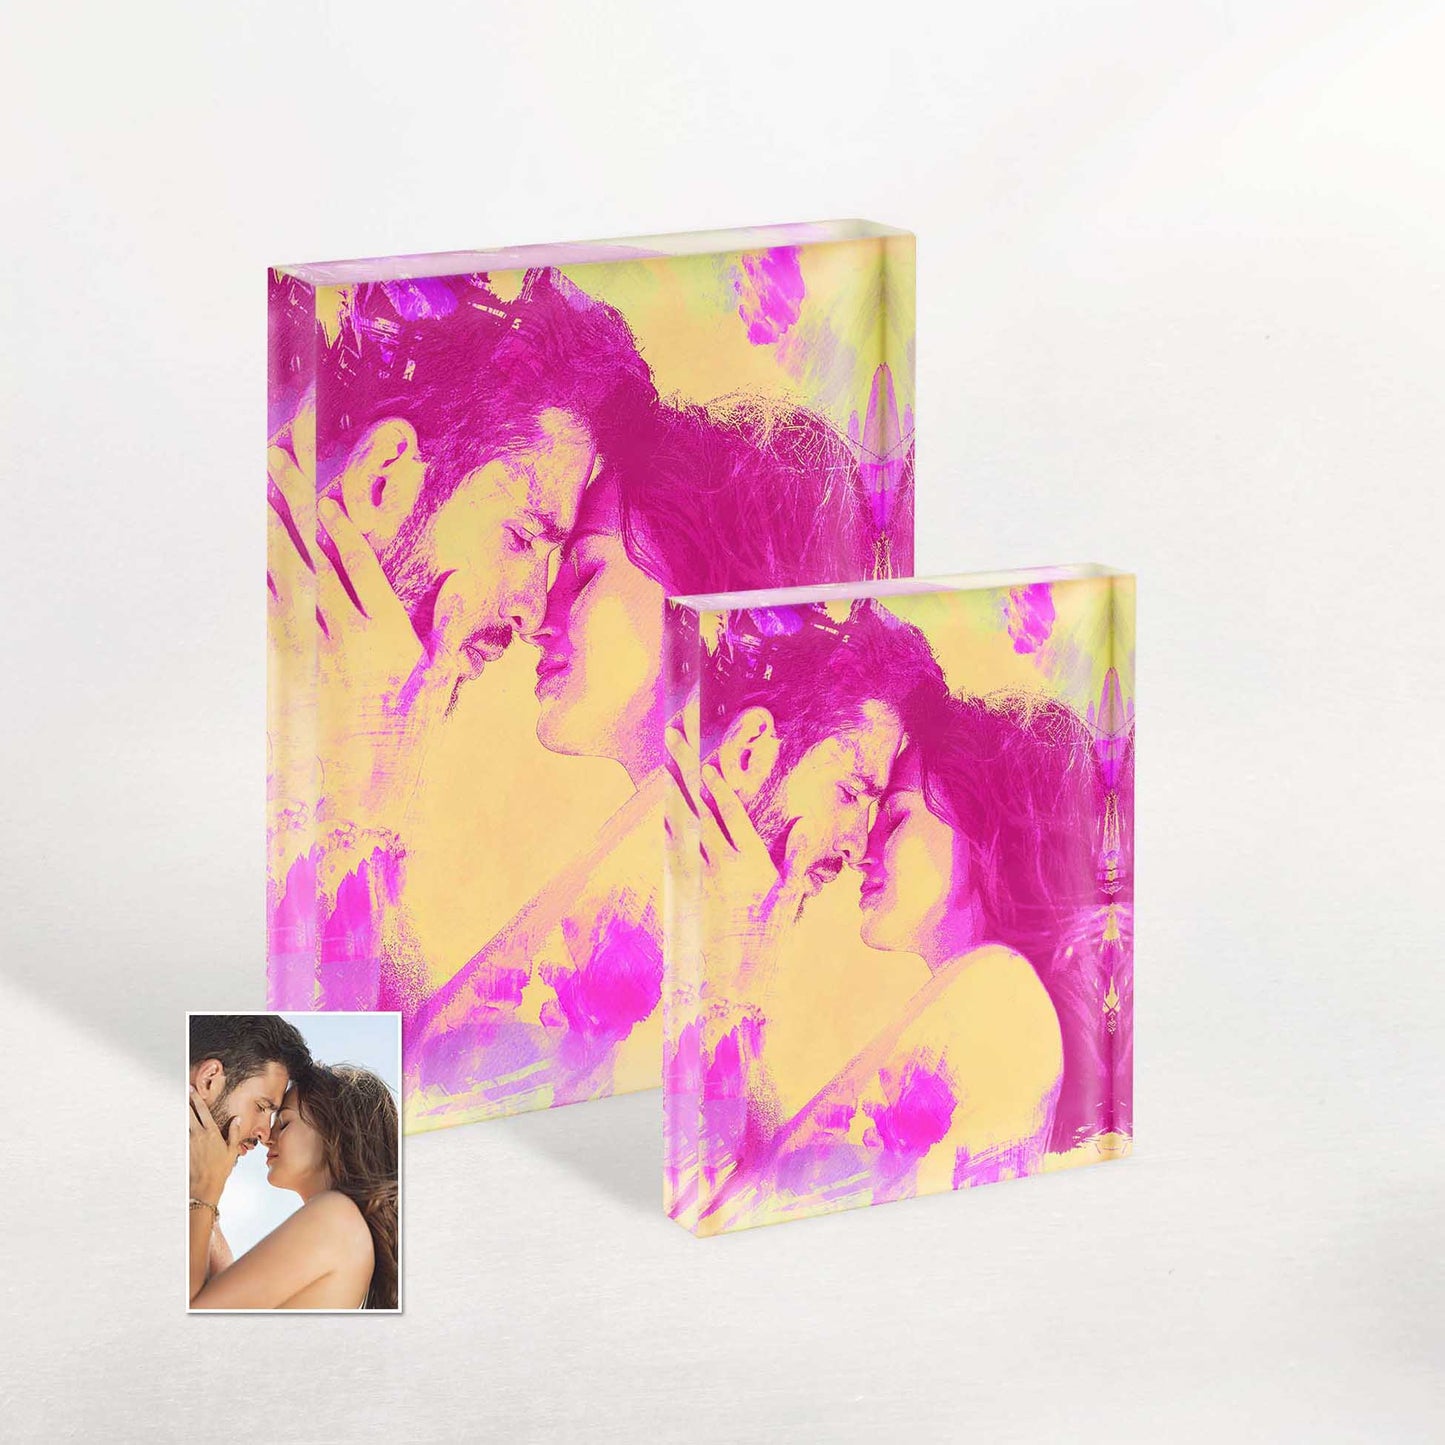 Elevate the celebration with our Personalised Pink and Yellow Watercolor Acrylic Block Photo. Its colorful and vibrant composition adds a cool and refreshing touch to any occasion, making it an exciting gift option for anniversaries or birthdays.